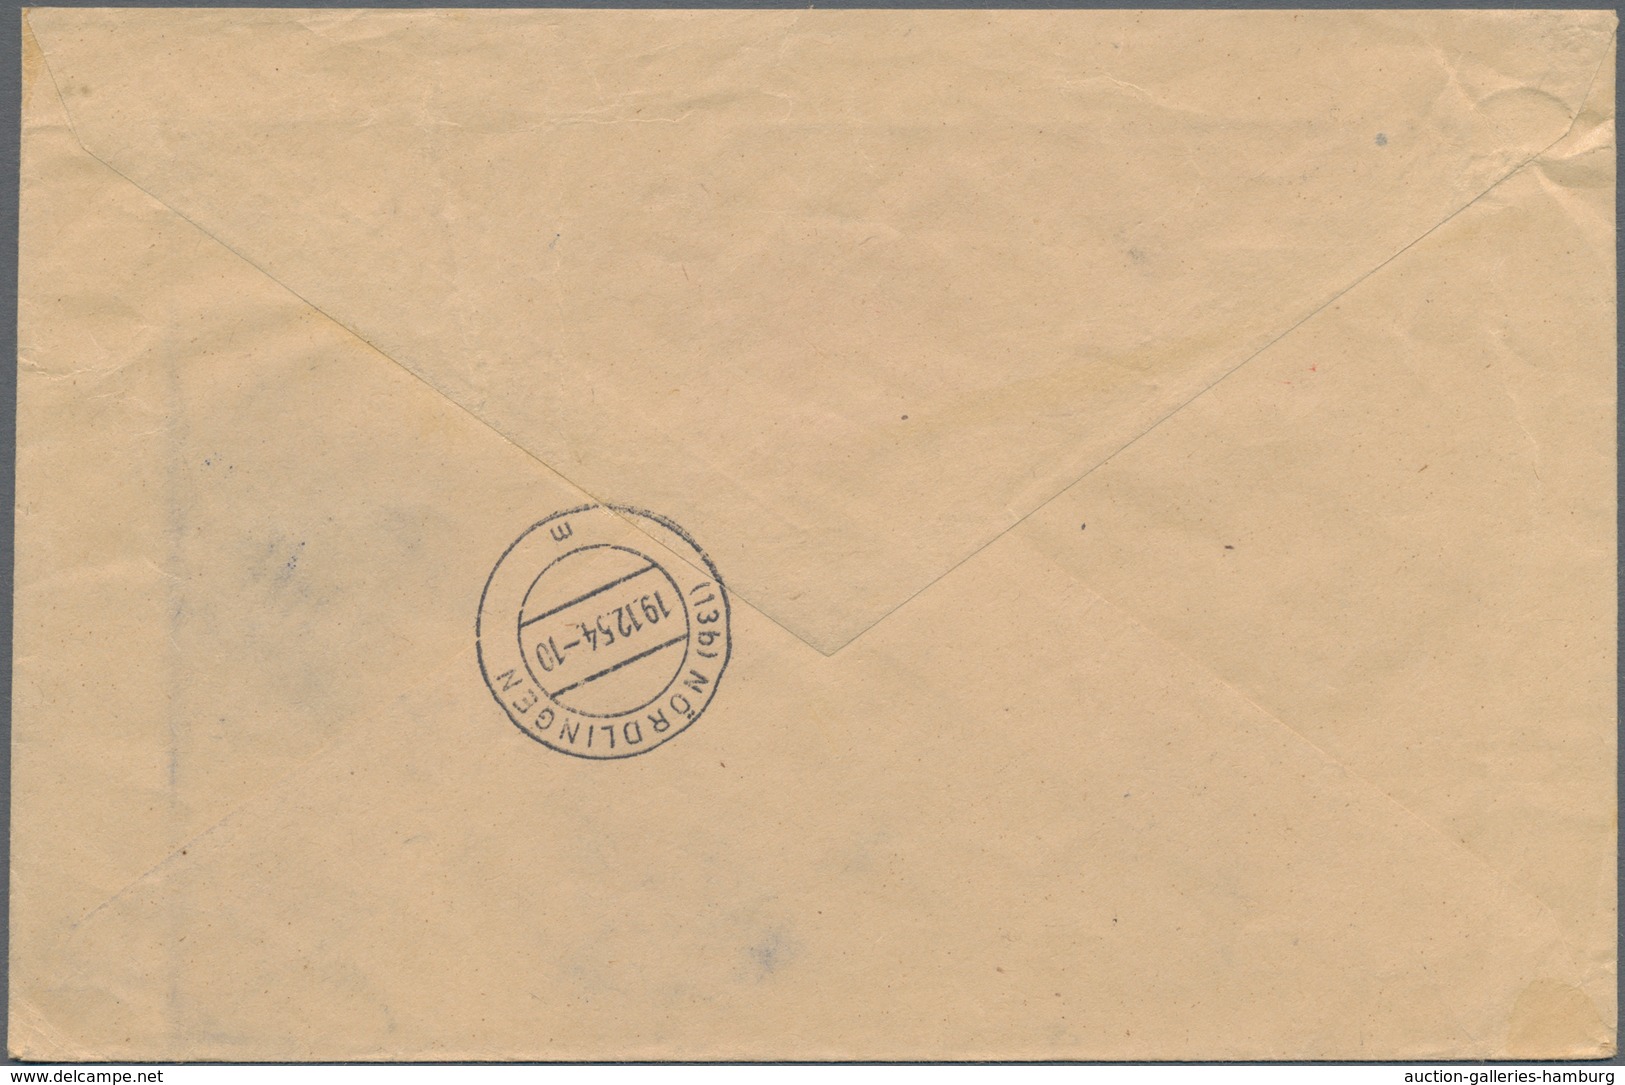 Syrien: 1952/1955, Three Registered Letters From "Republique Syrienne Direction Generale Des Postes" - Syrie